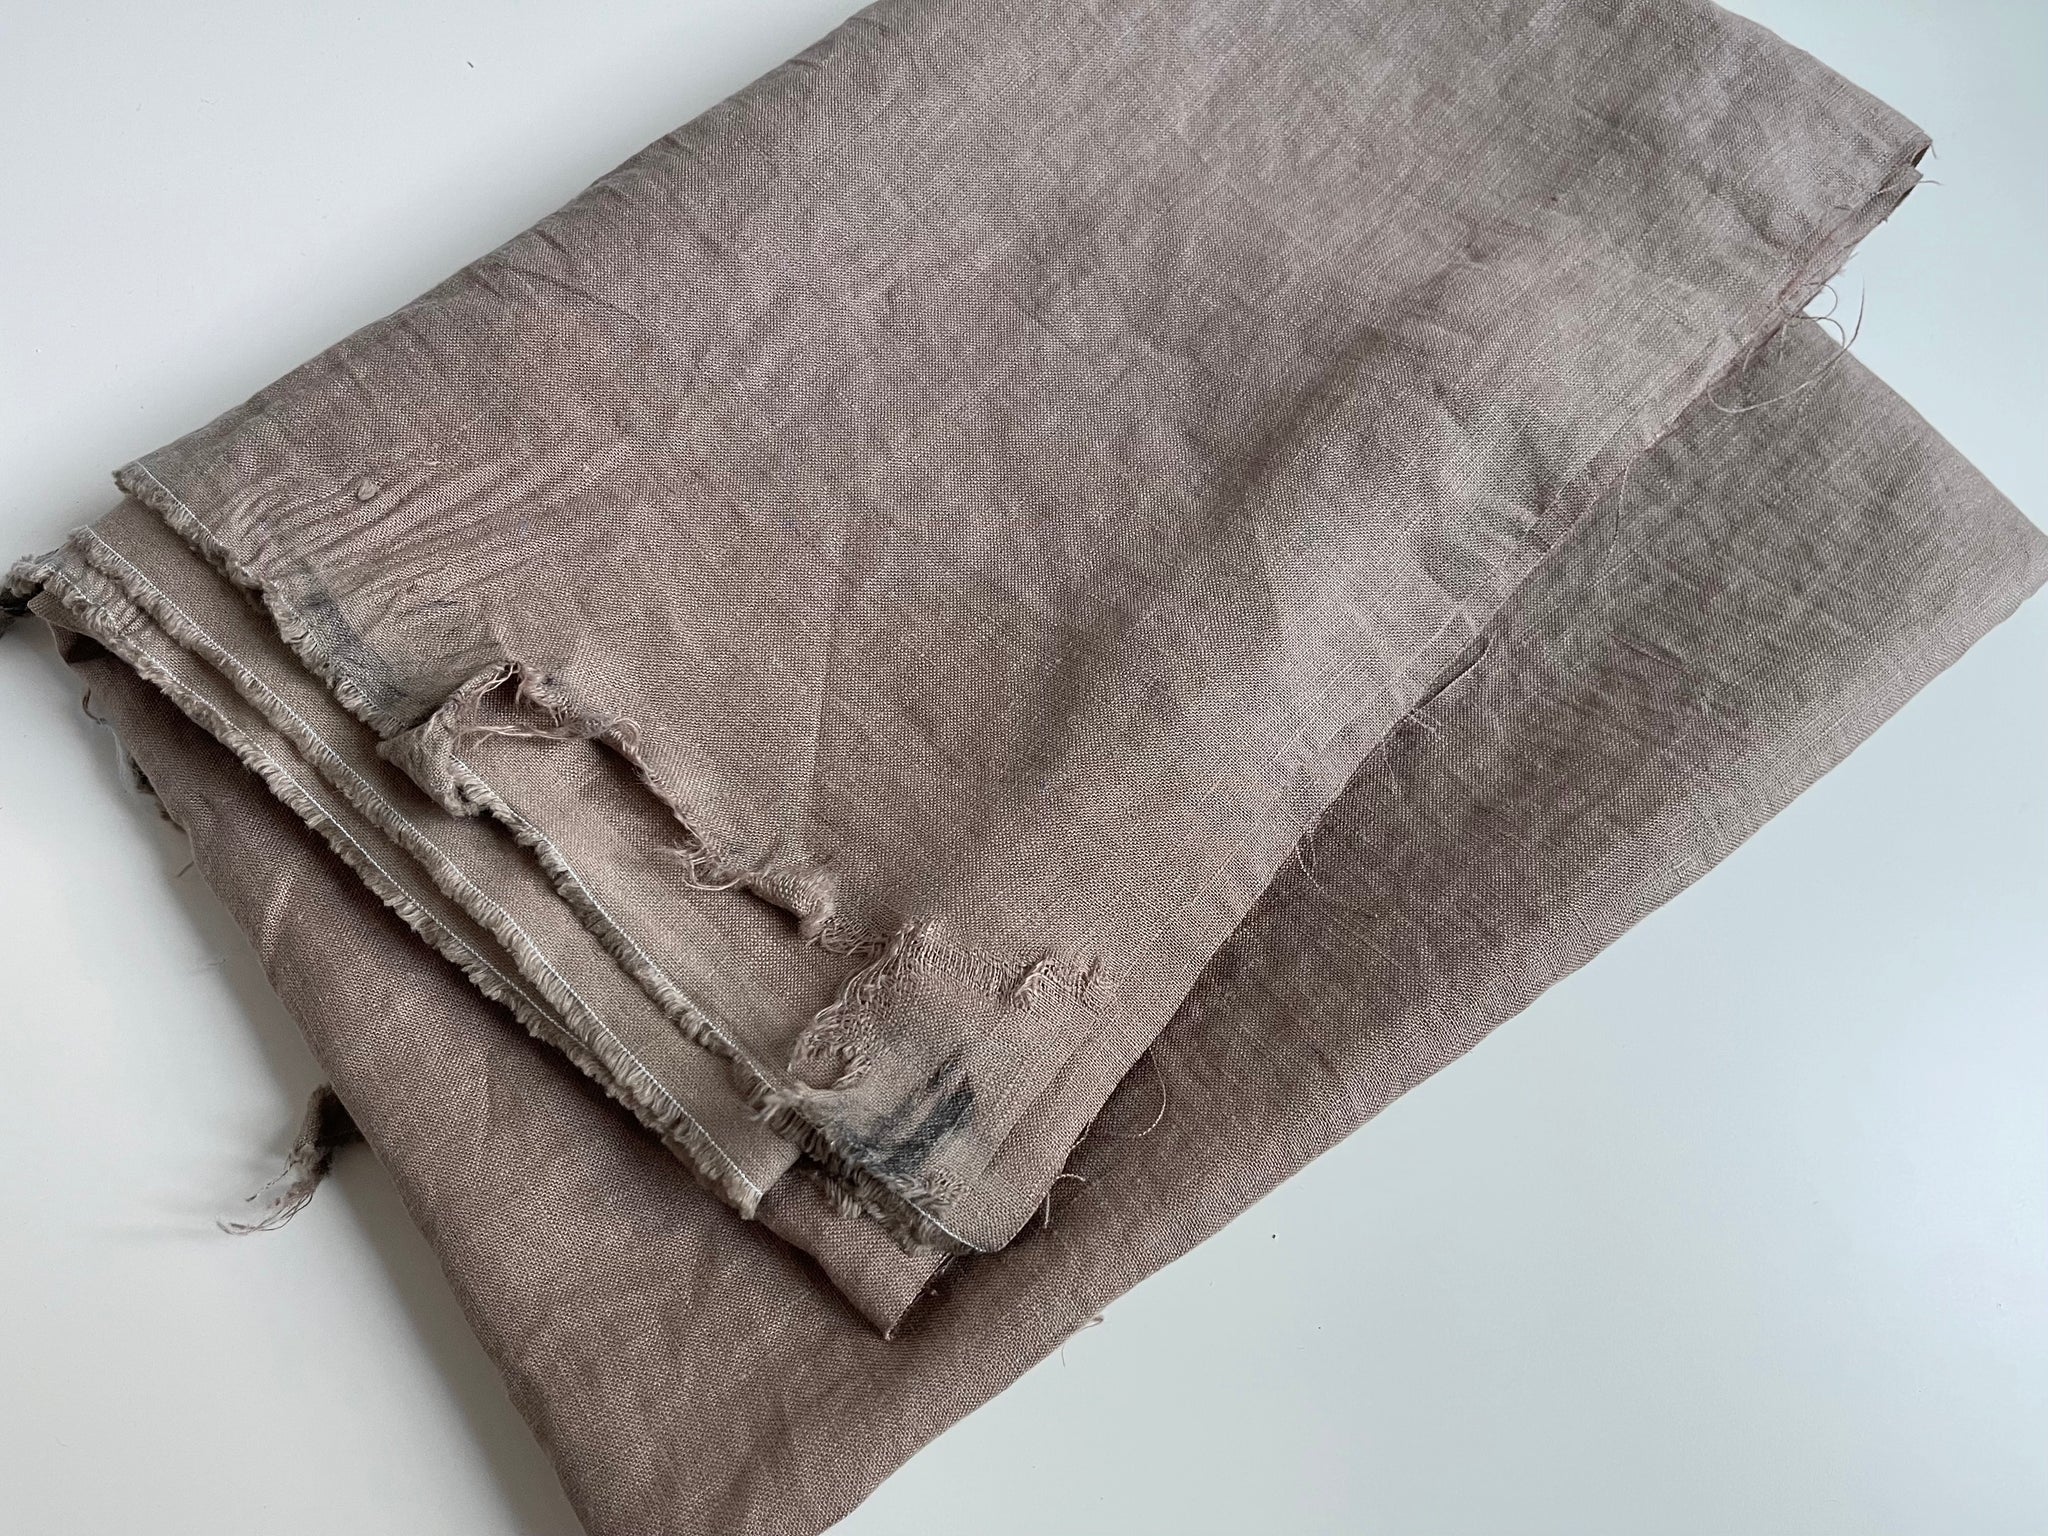 Linen Fabric Remnants - Desert Clay - 2 yards cut - small rips along selvage